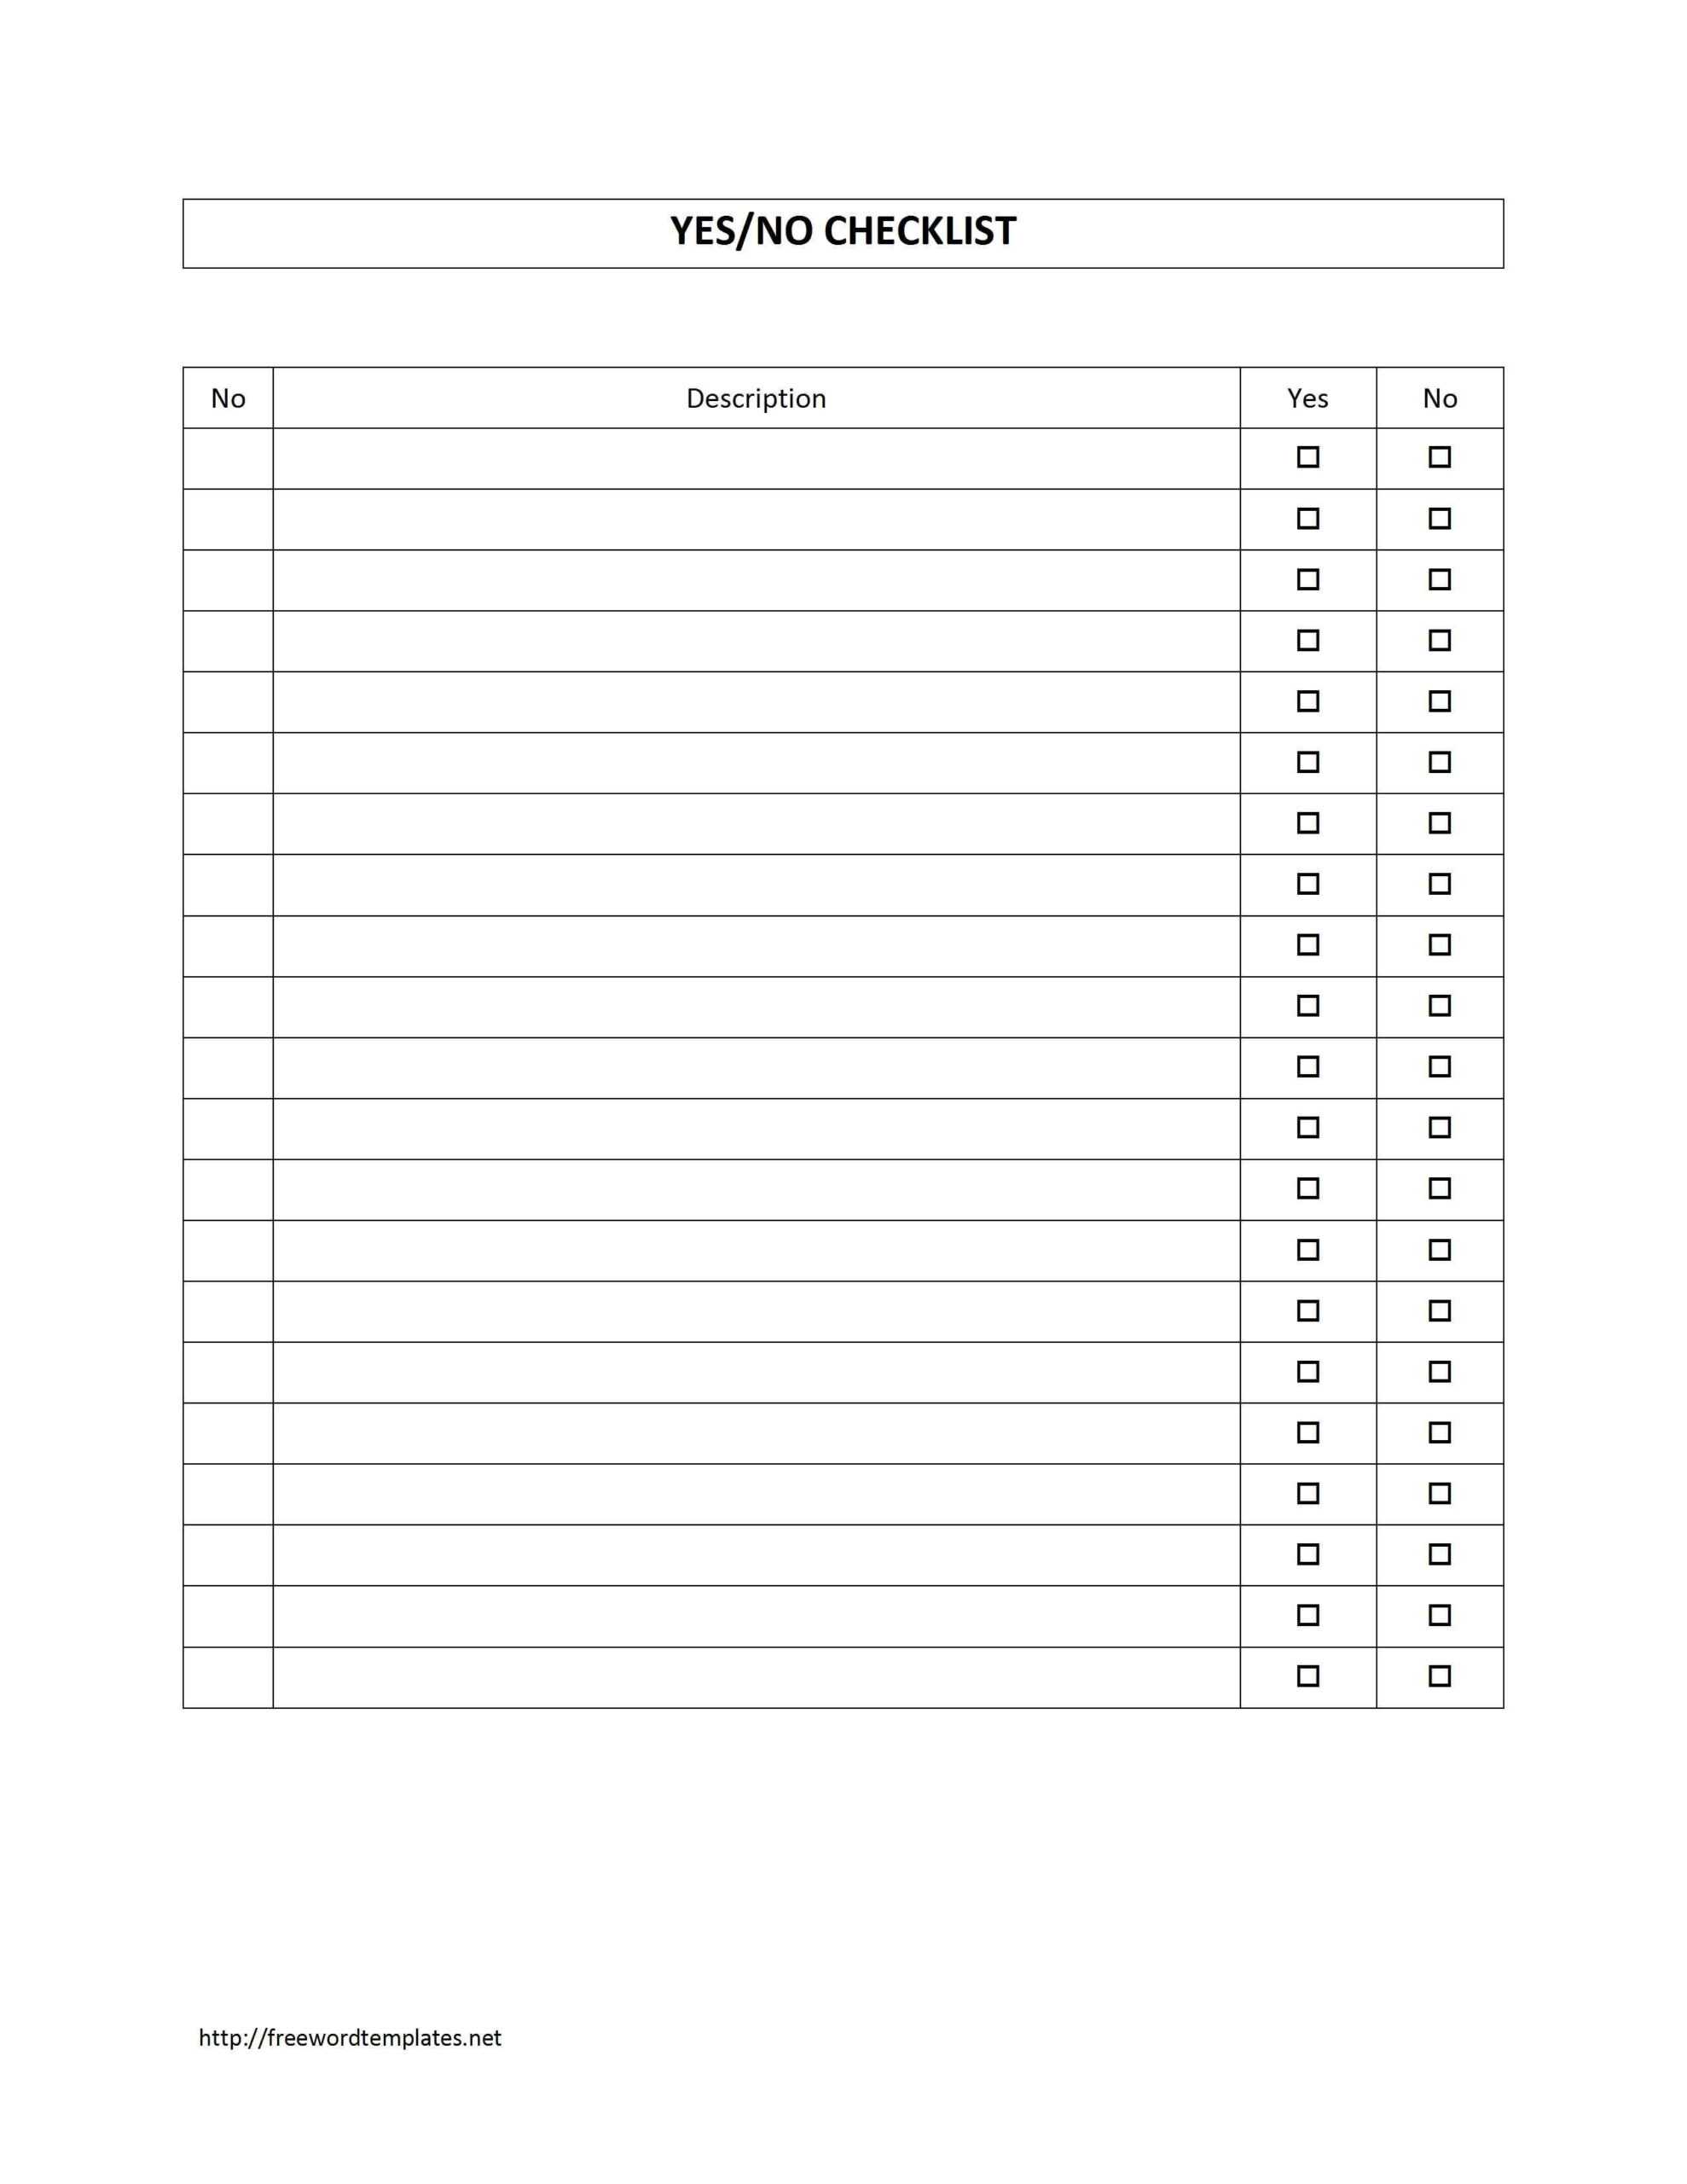 Survey Sheet With Yes/no Checklist Template | Free Microsoft Intended For Questionnaire Design Template Word